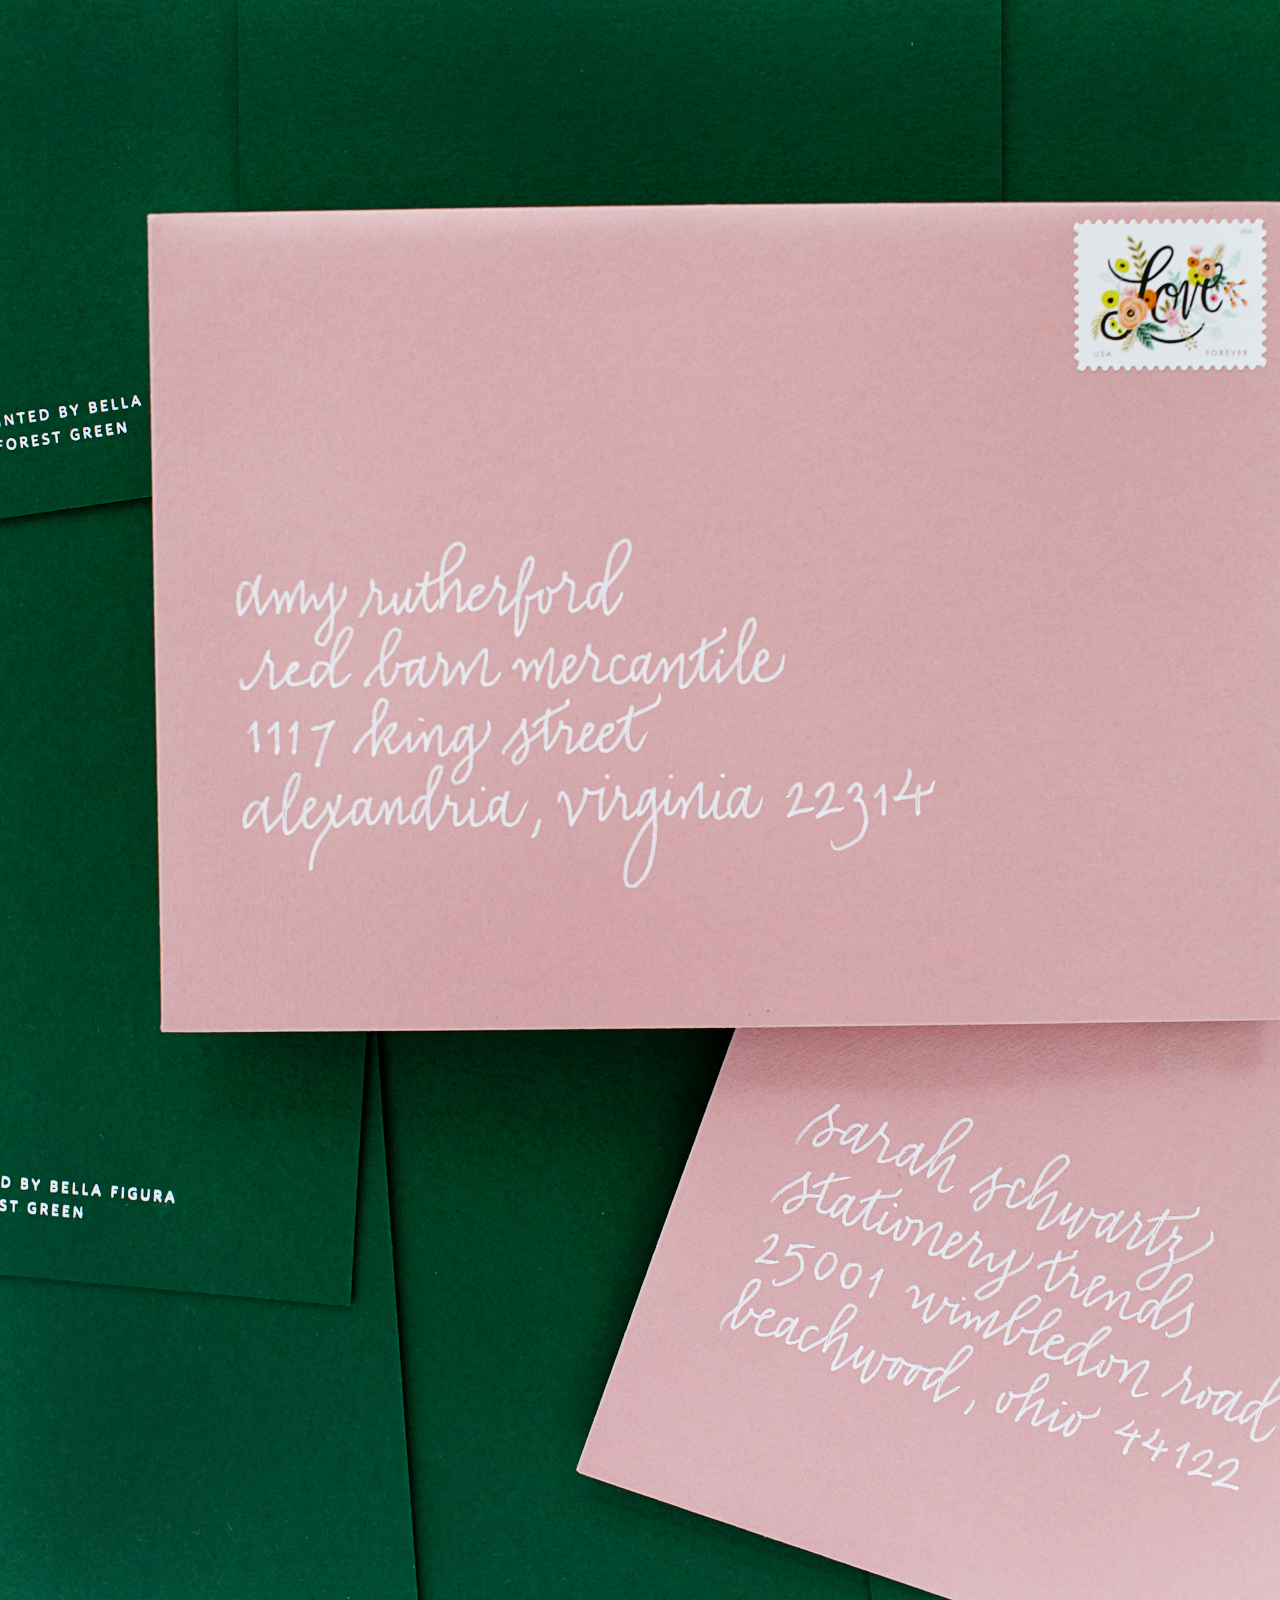 Paper Party 2018 Invitations on Colorplan Forest Green Paper